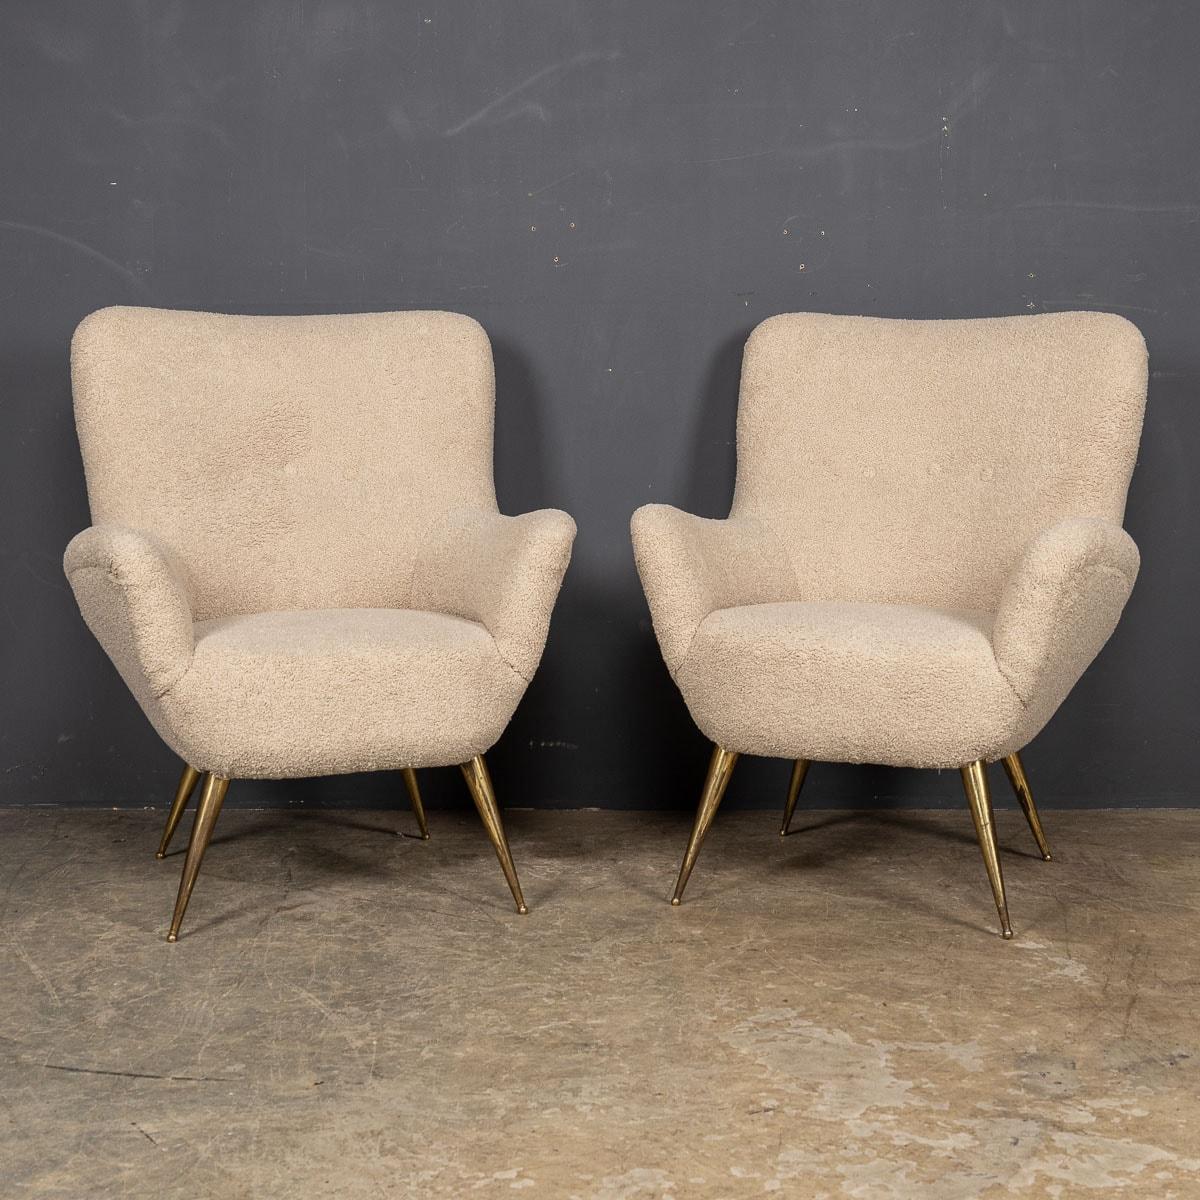 An exquisite duo of mid-20th Century Italian armchairs, featuring elegant metal legs and skillfully reupholstered in sumptuous cream boucle fabric, complete with removable seat cushions. These chairs epitomize exceptional quality, graced with a